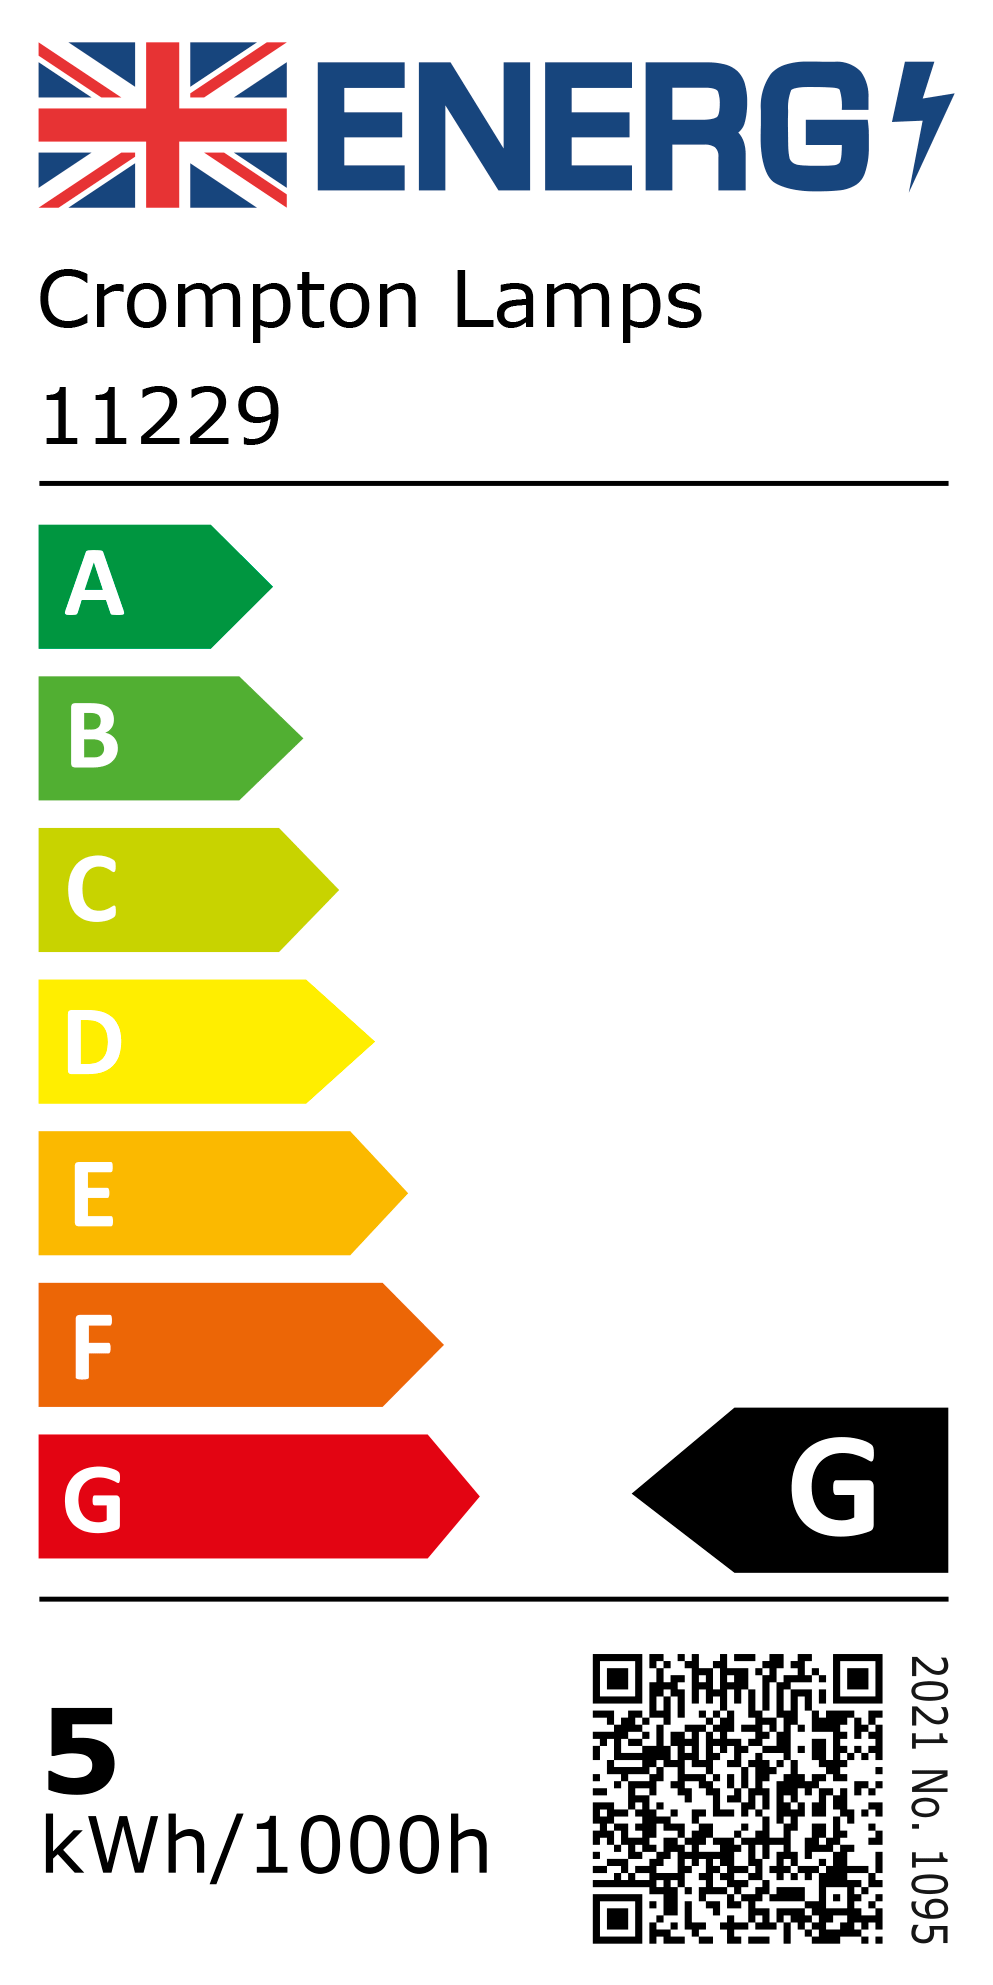 New 2021 Energy Rating Label: Stock Code 11229